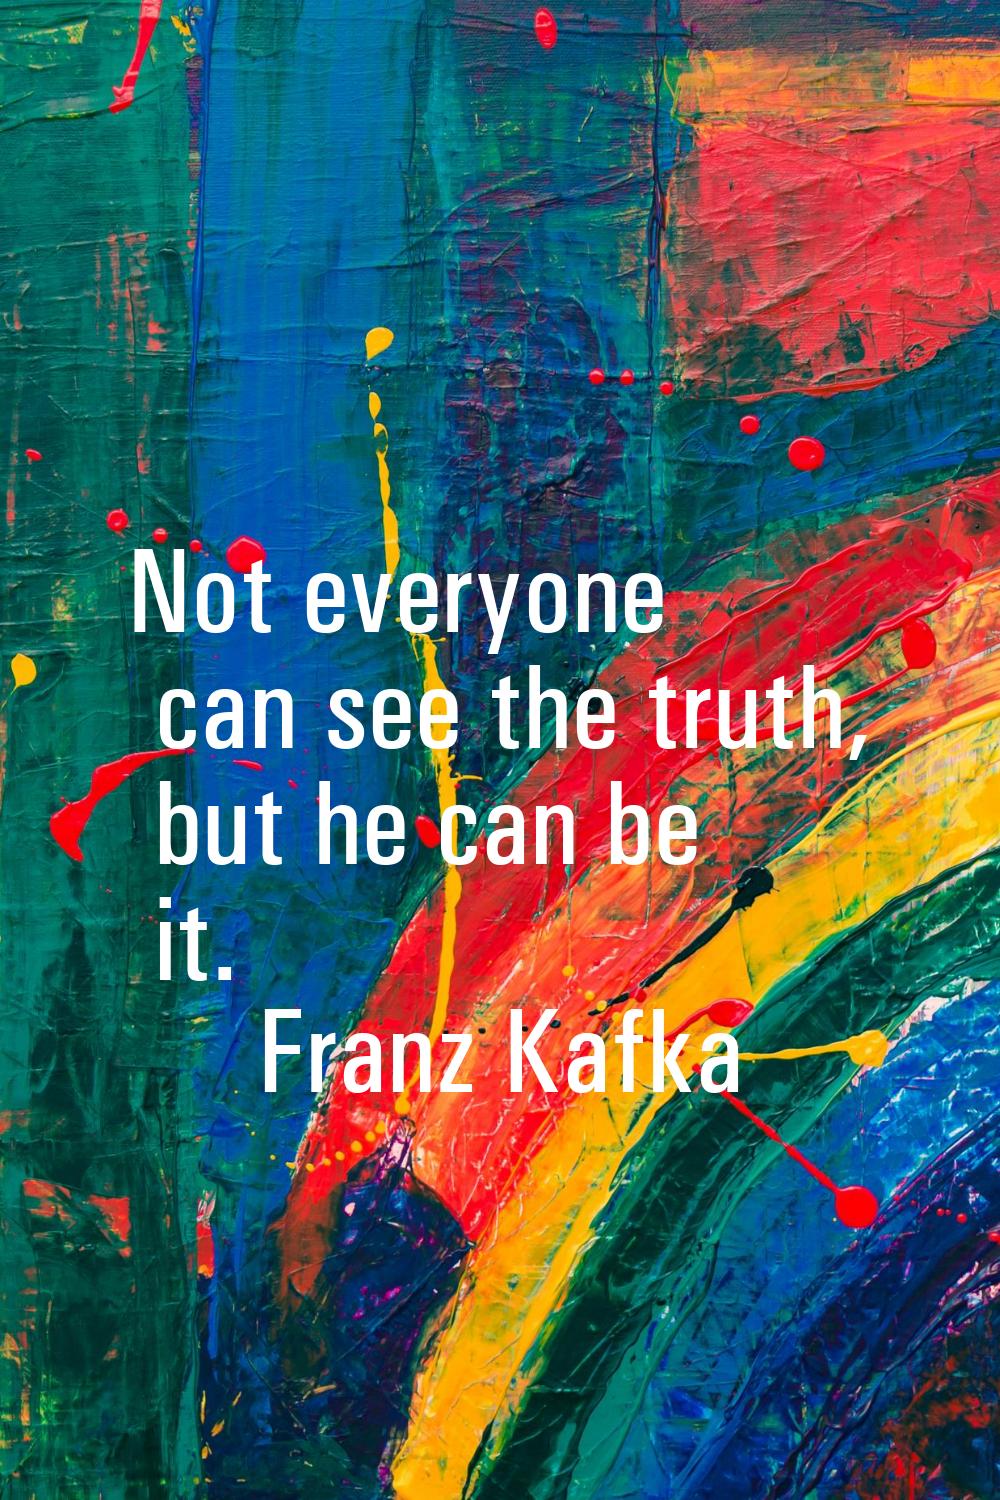 Not everyone can see the truth, but he can be it.